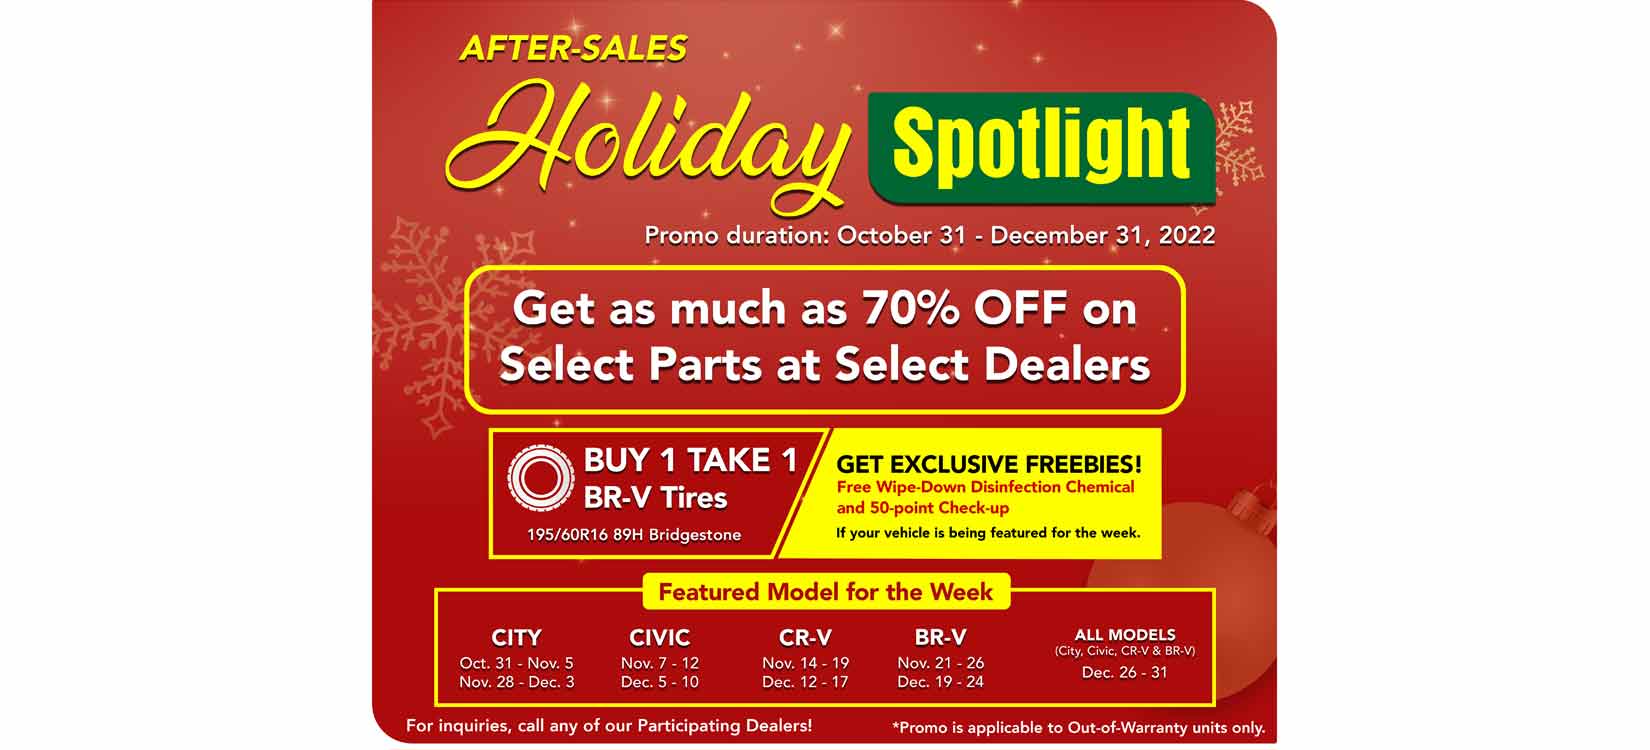 Exciting service deals from Honda Cars’ Holiday Spotlight Promo